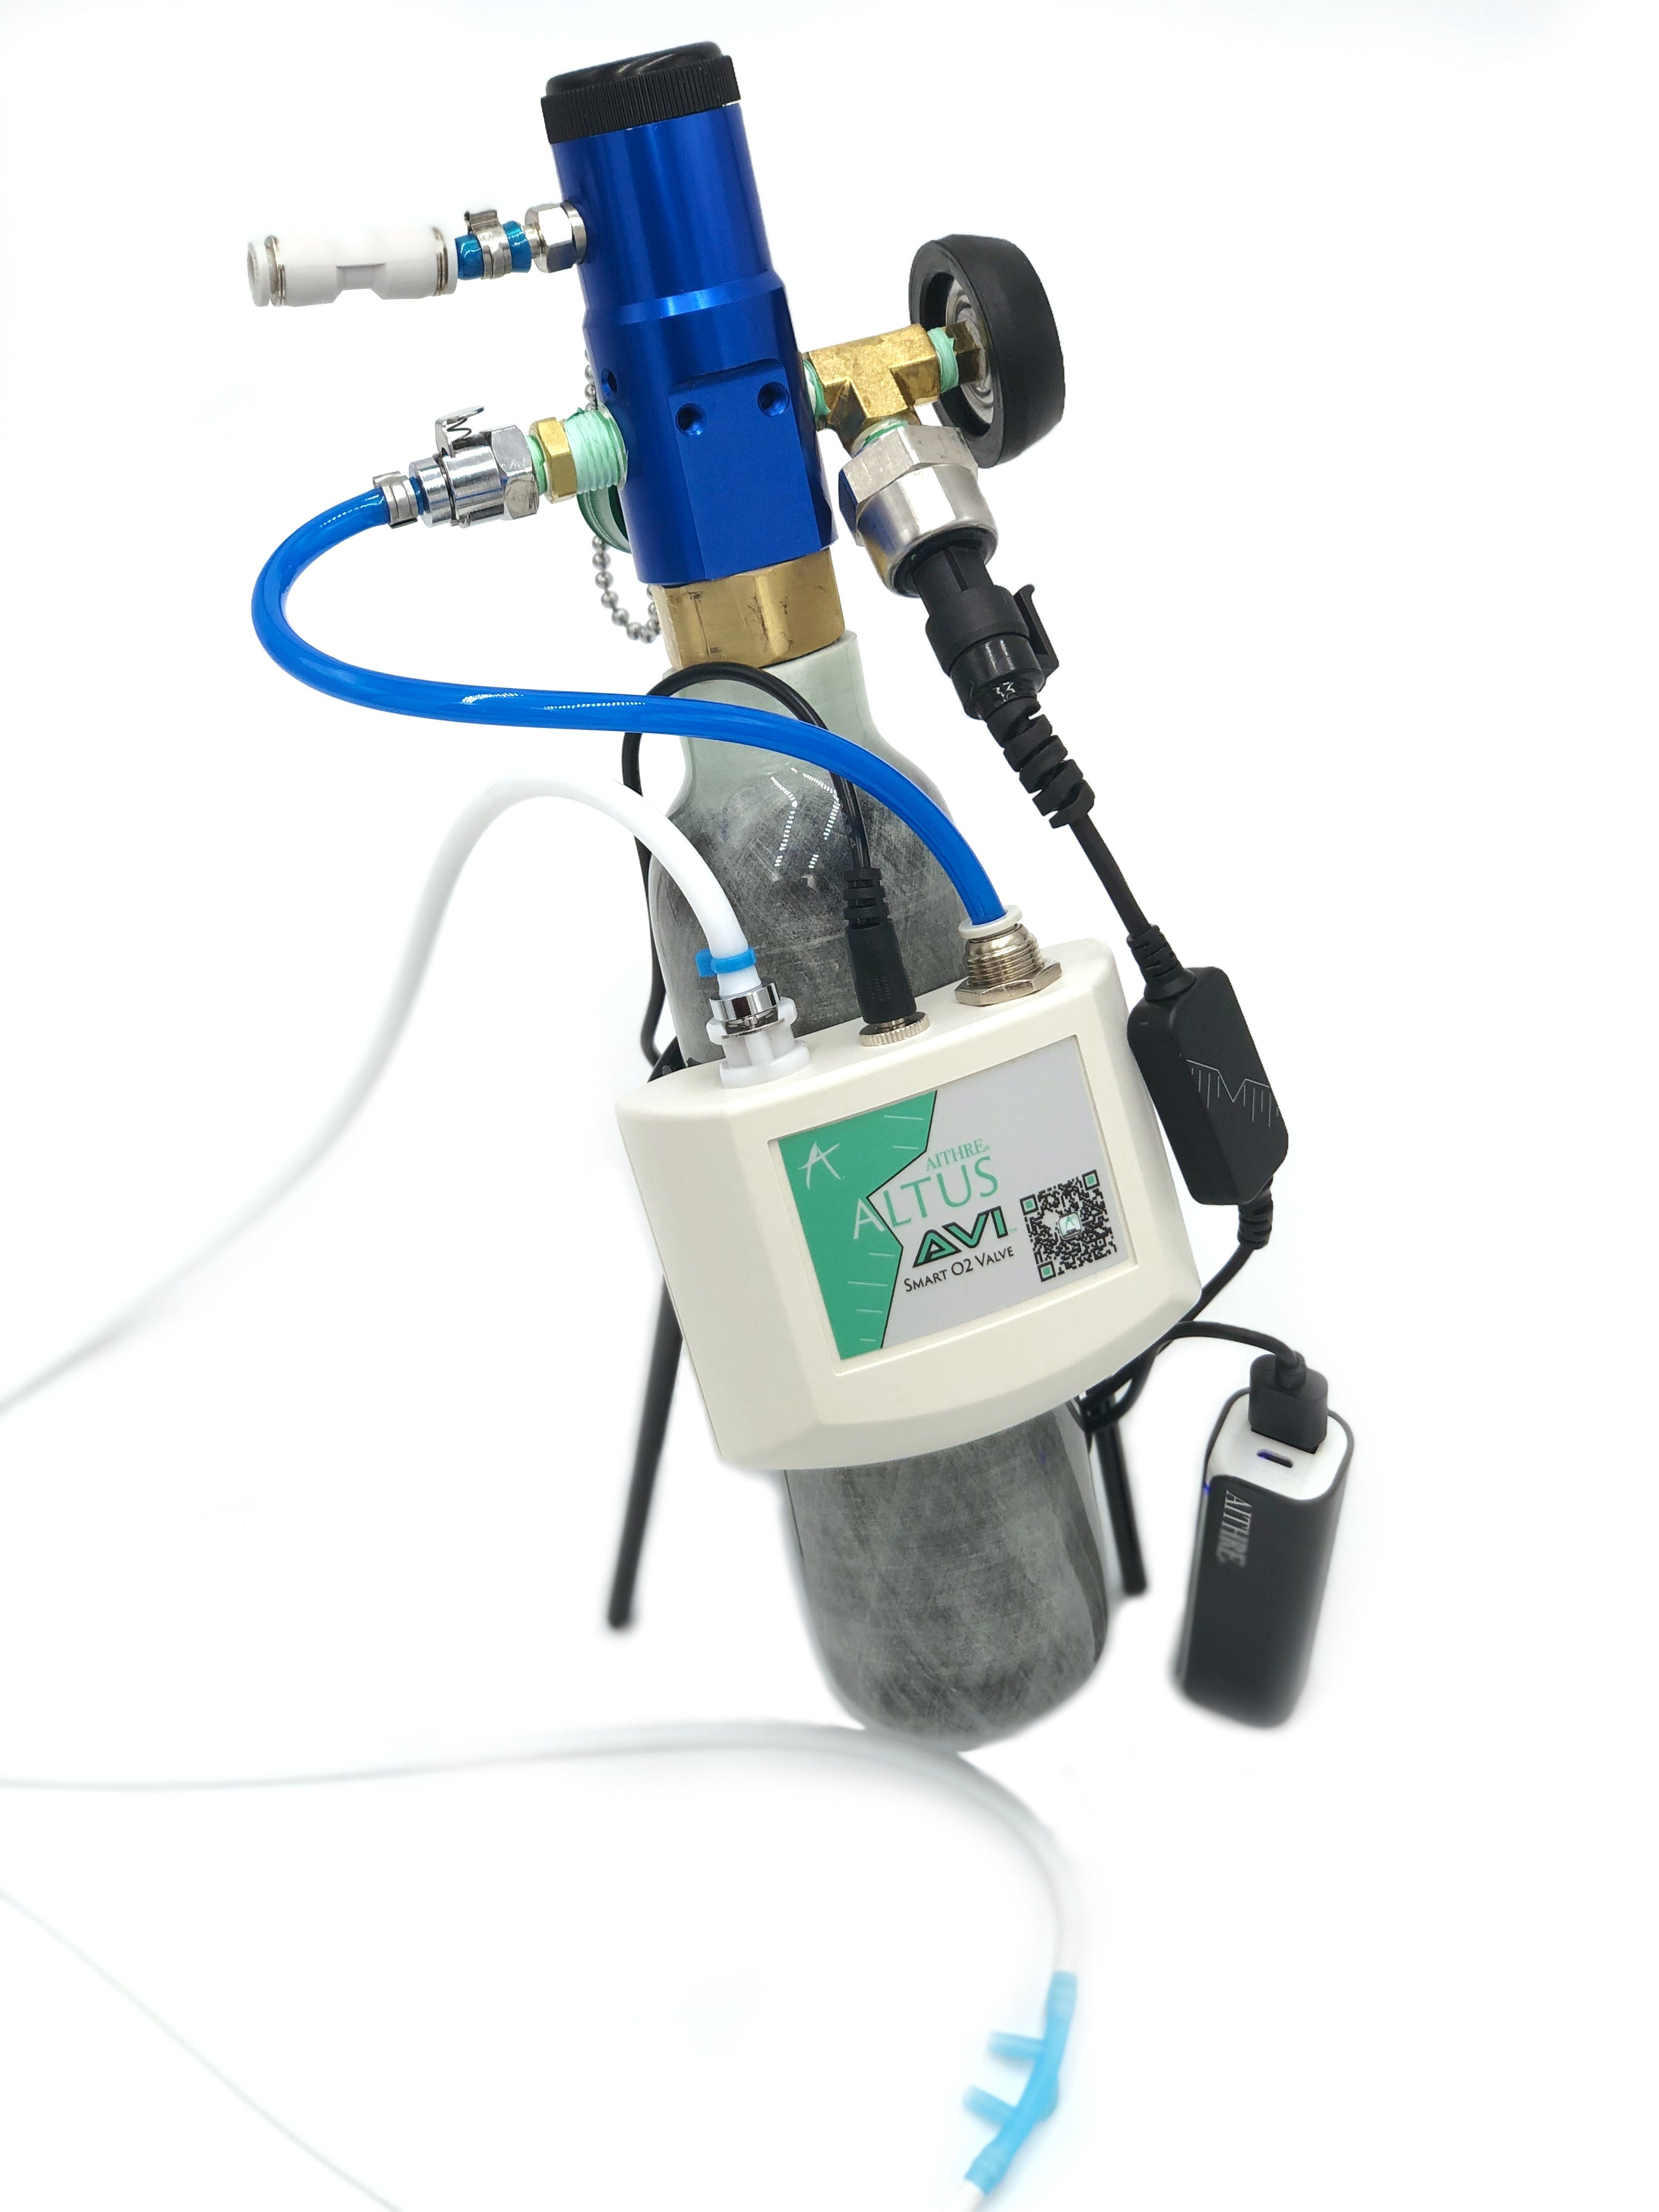 AVI 1-Place Smart O2 Valve with 47L Bottle and Altus Meso